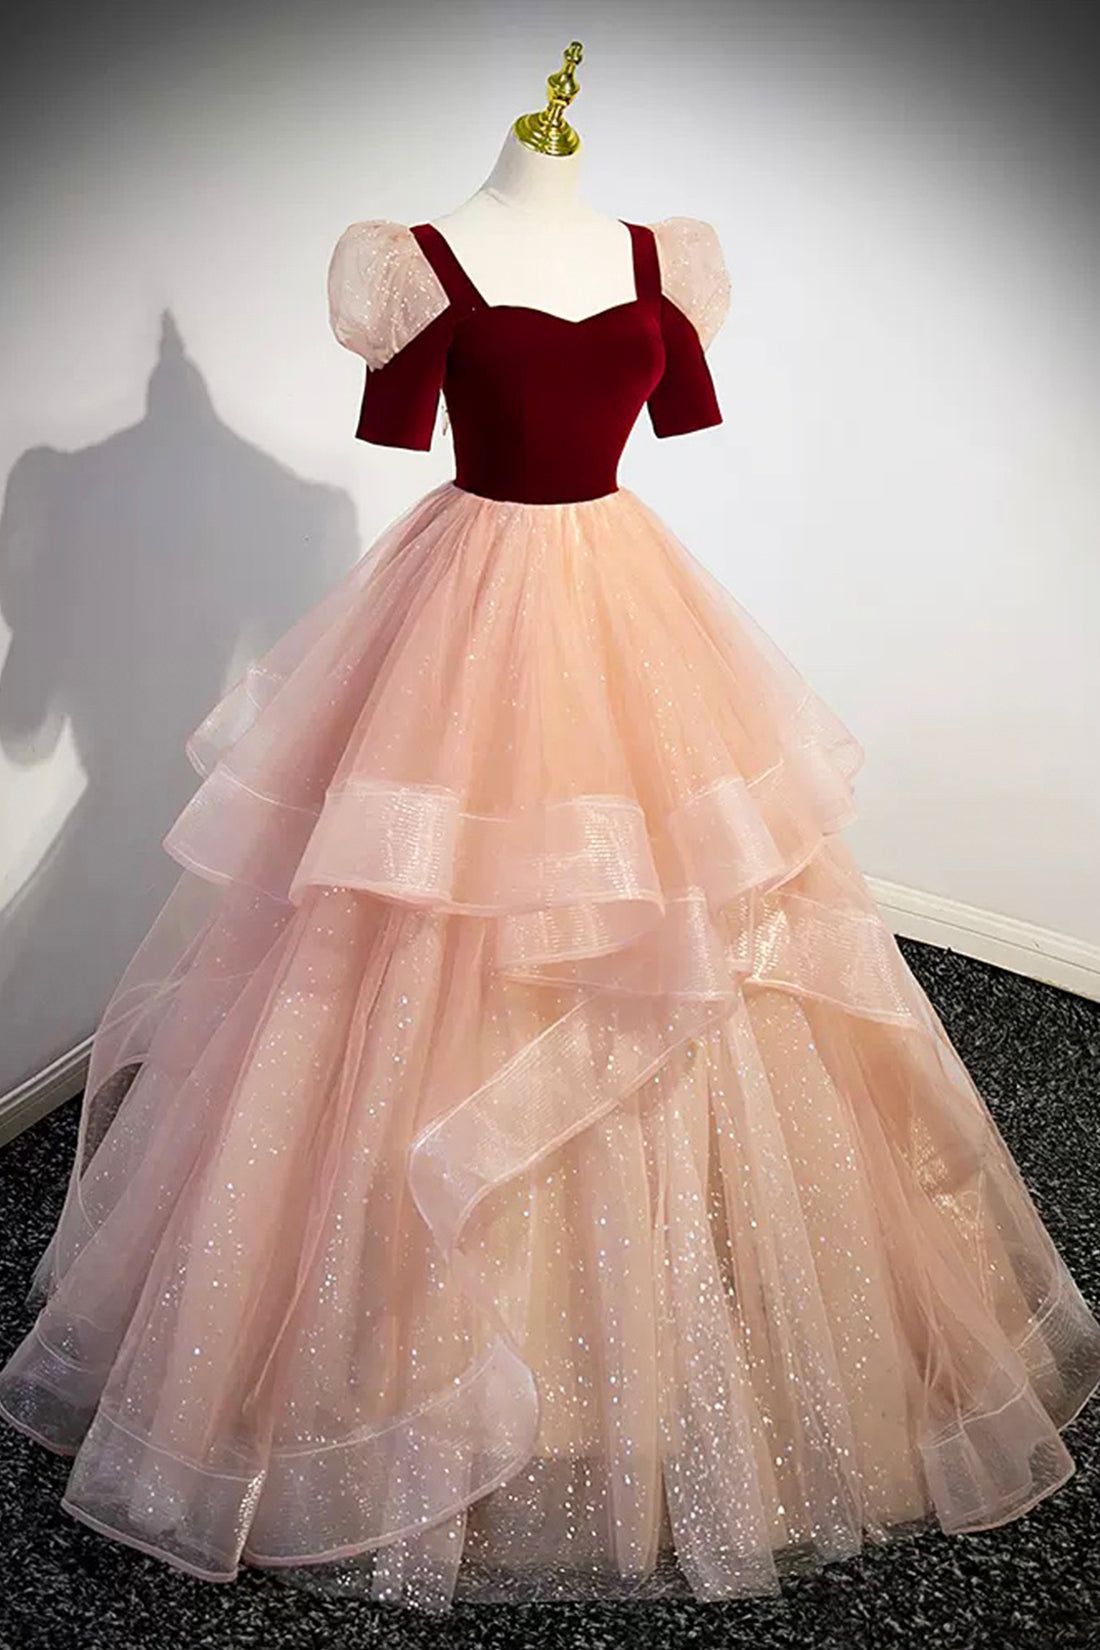 Prom Dresses For Chubby Girls, Unique Velvet Long A-Line Prom Dress with Ruffles, Cute Evening Party Dress